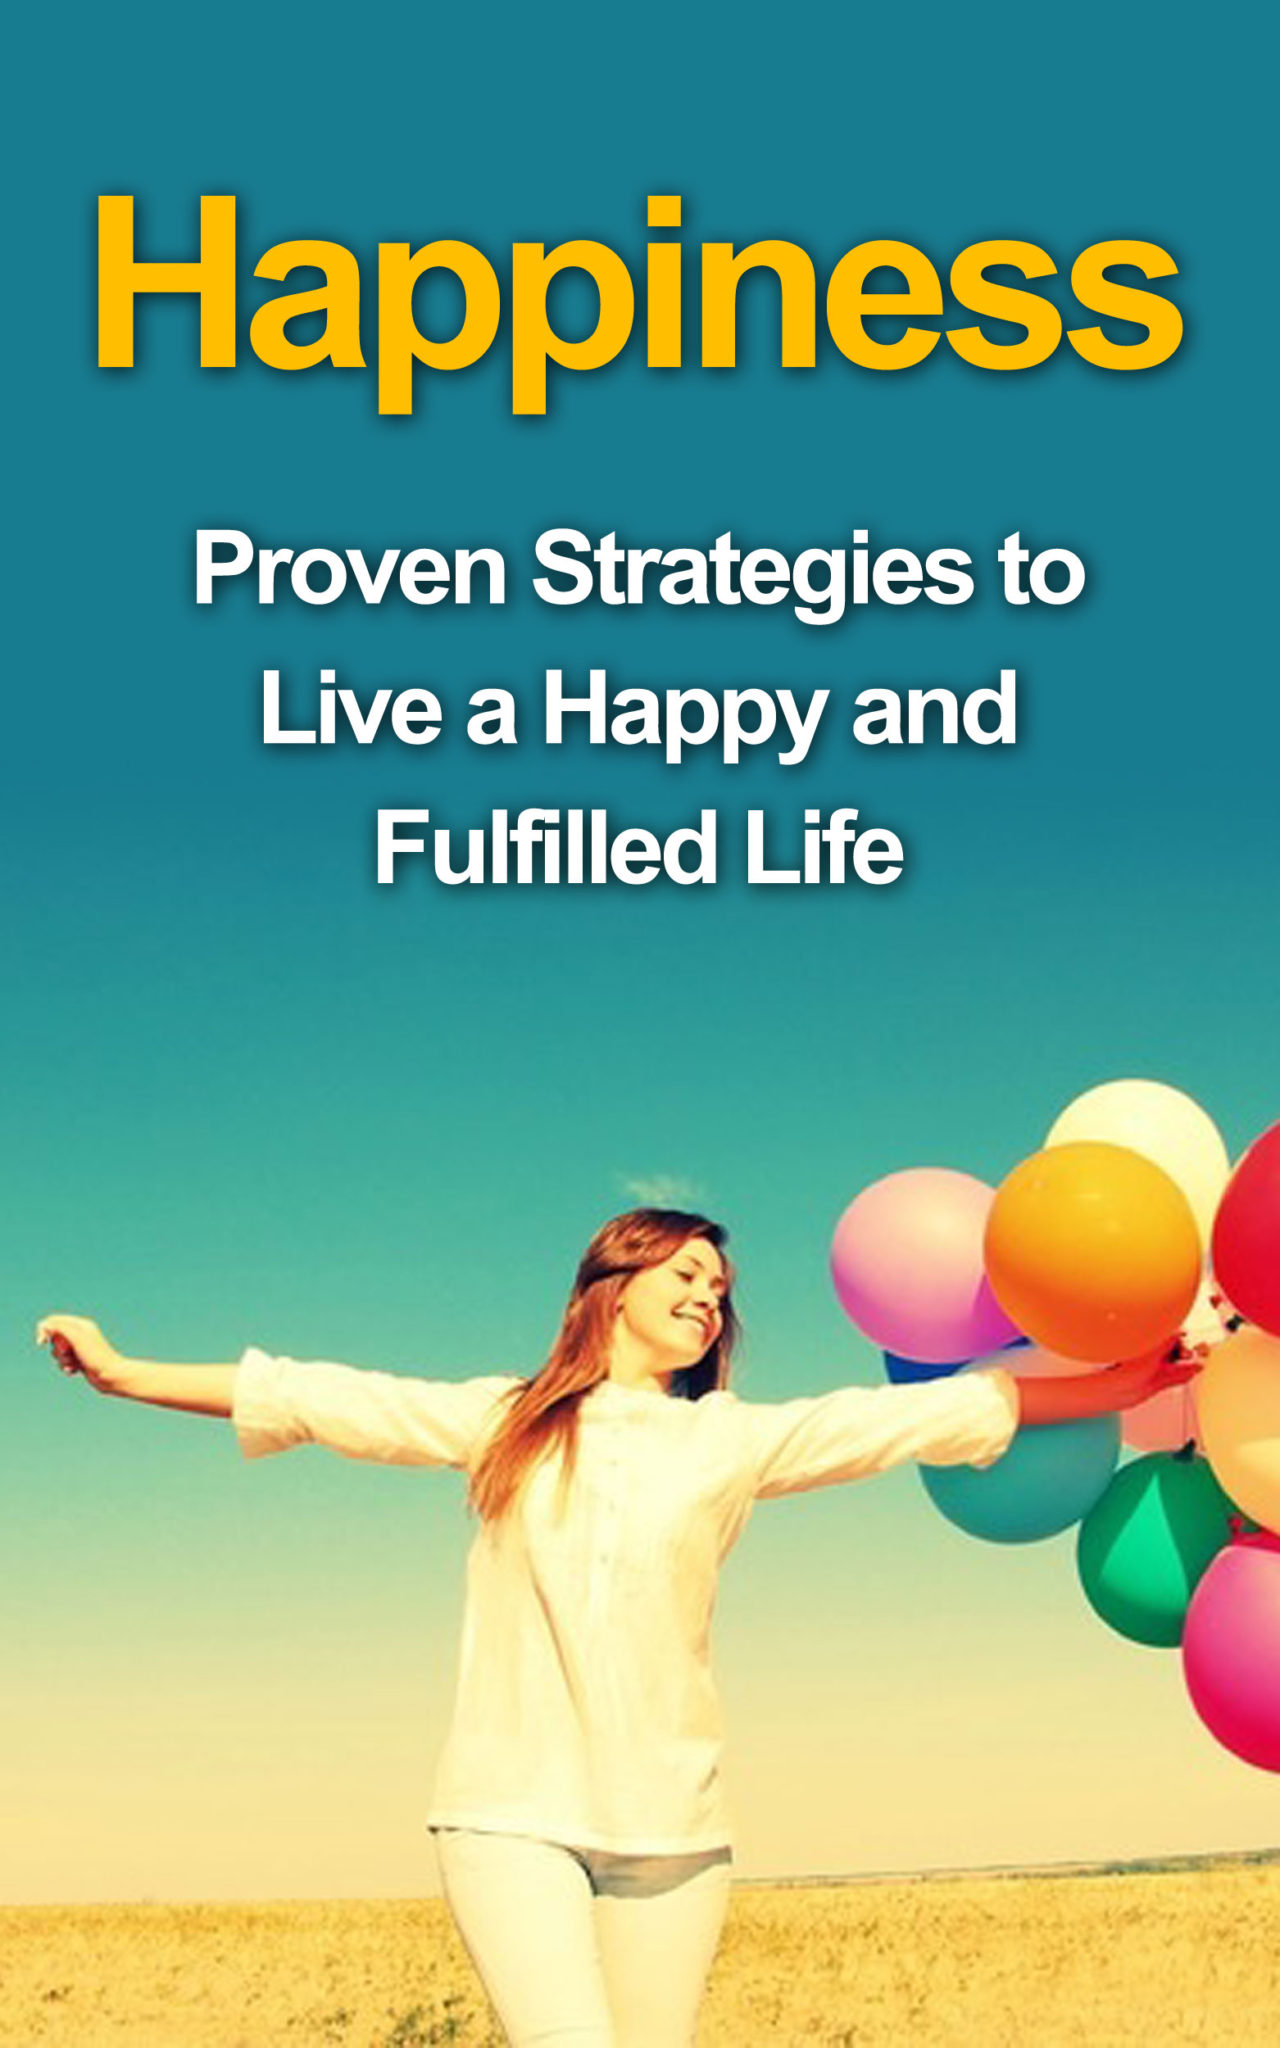 FREE: Happiness: Proven Strategies to Live a Happy and Fulfilled Life by Shawna McKenzie